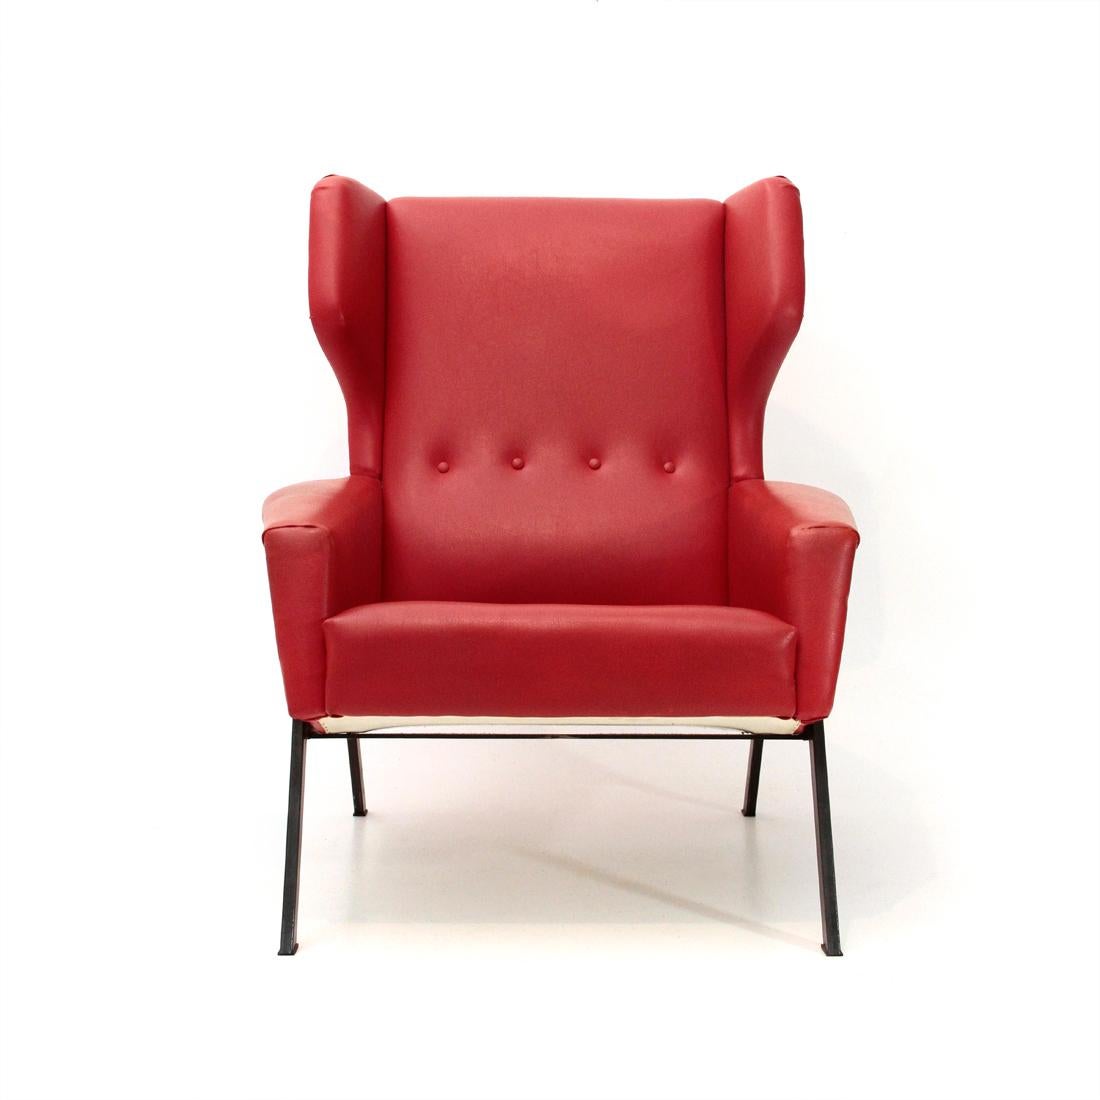 Italian manufacturing armchairs produced in the 1950s.
Wooden structure padded and lined with imitation red leather, original of the time.
Legs in black painted iron.
Good general conditions, some signs due to normal use over time.

Dimensions: